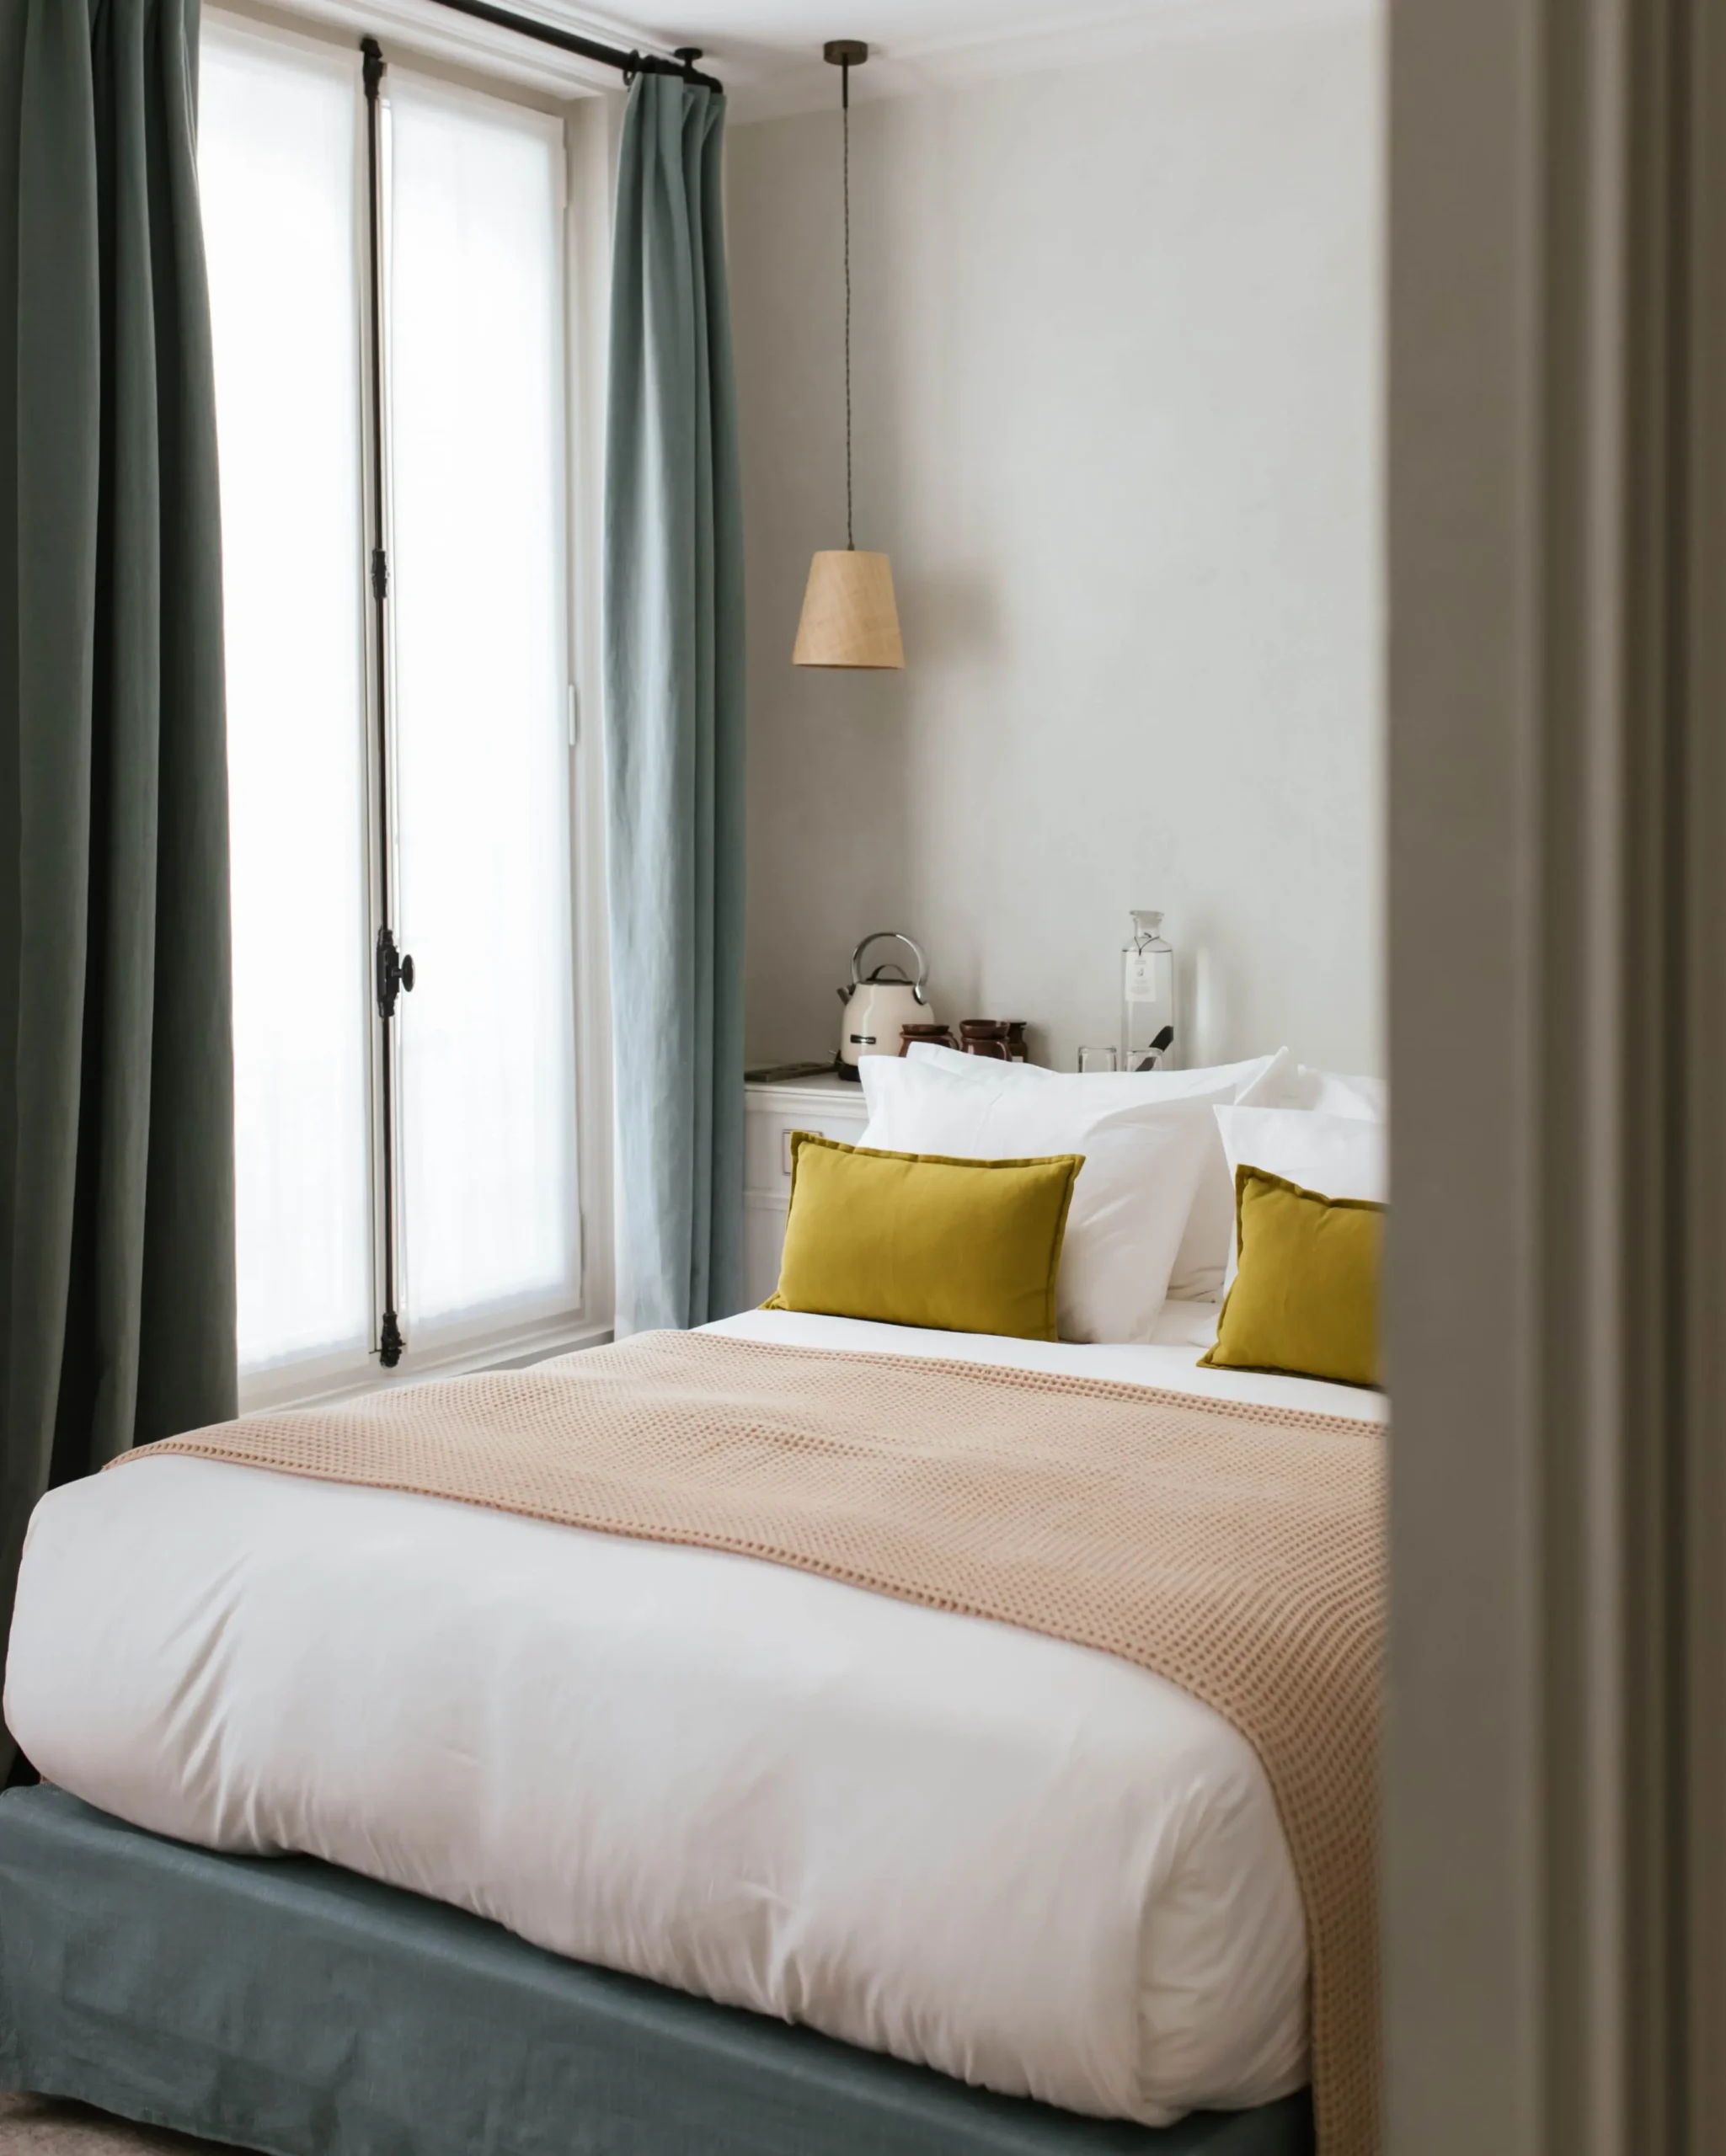 Minimalist yet cozy room at HOY Hotel Paris, reflecting an eco-friendly approach with natural light, crisp linens, and a calm color palette accented by a green headboard and vibrant plants.